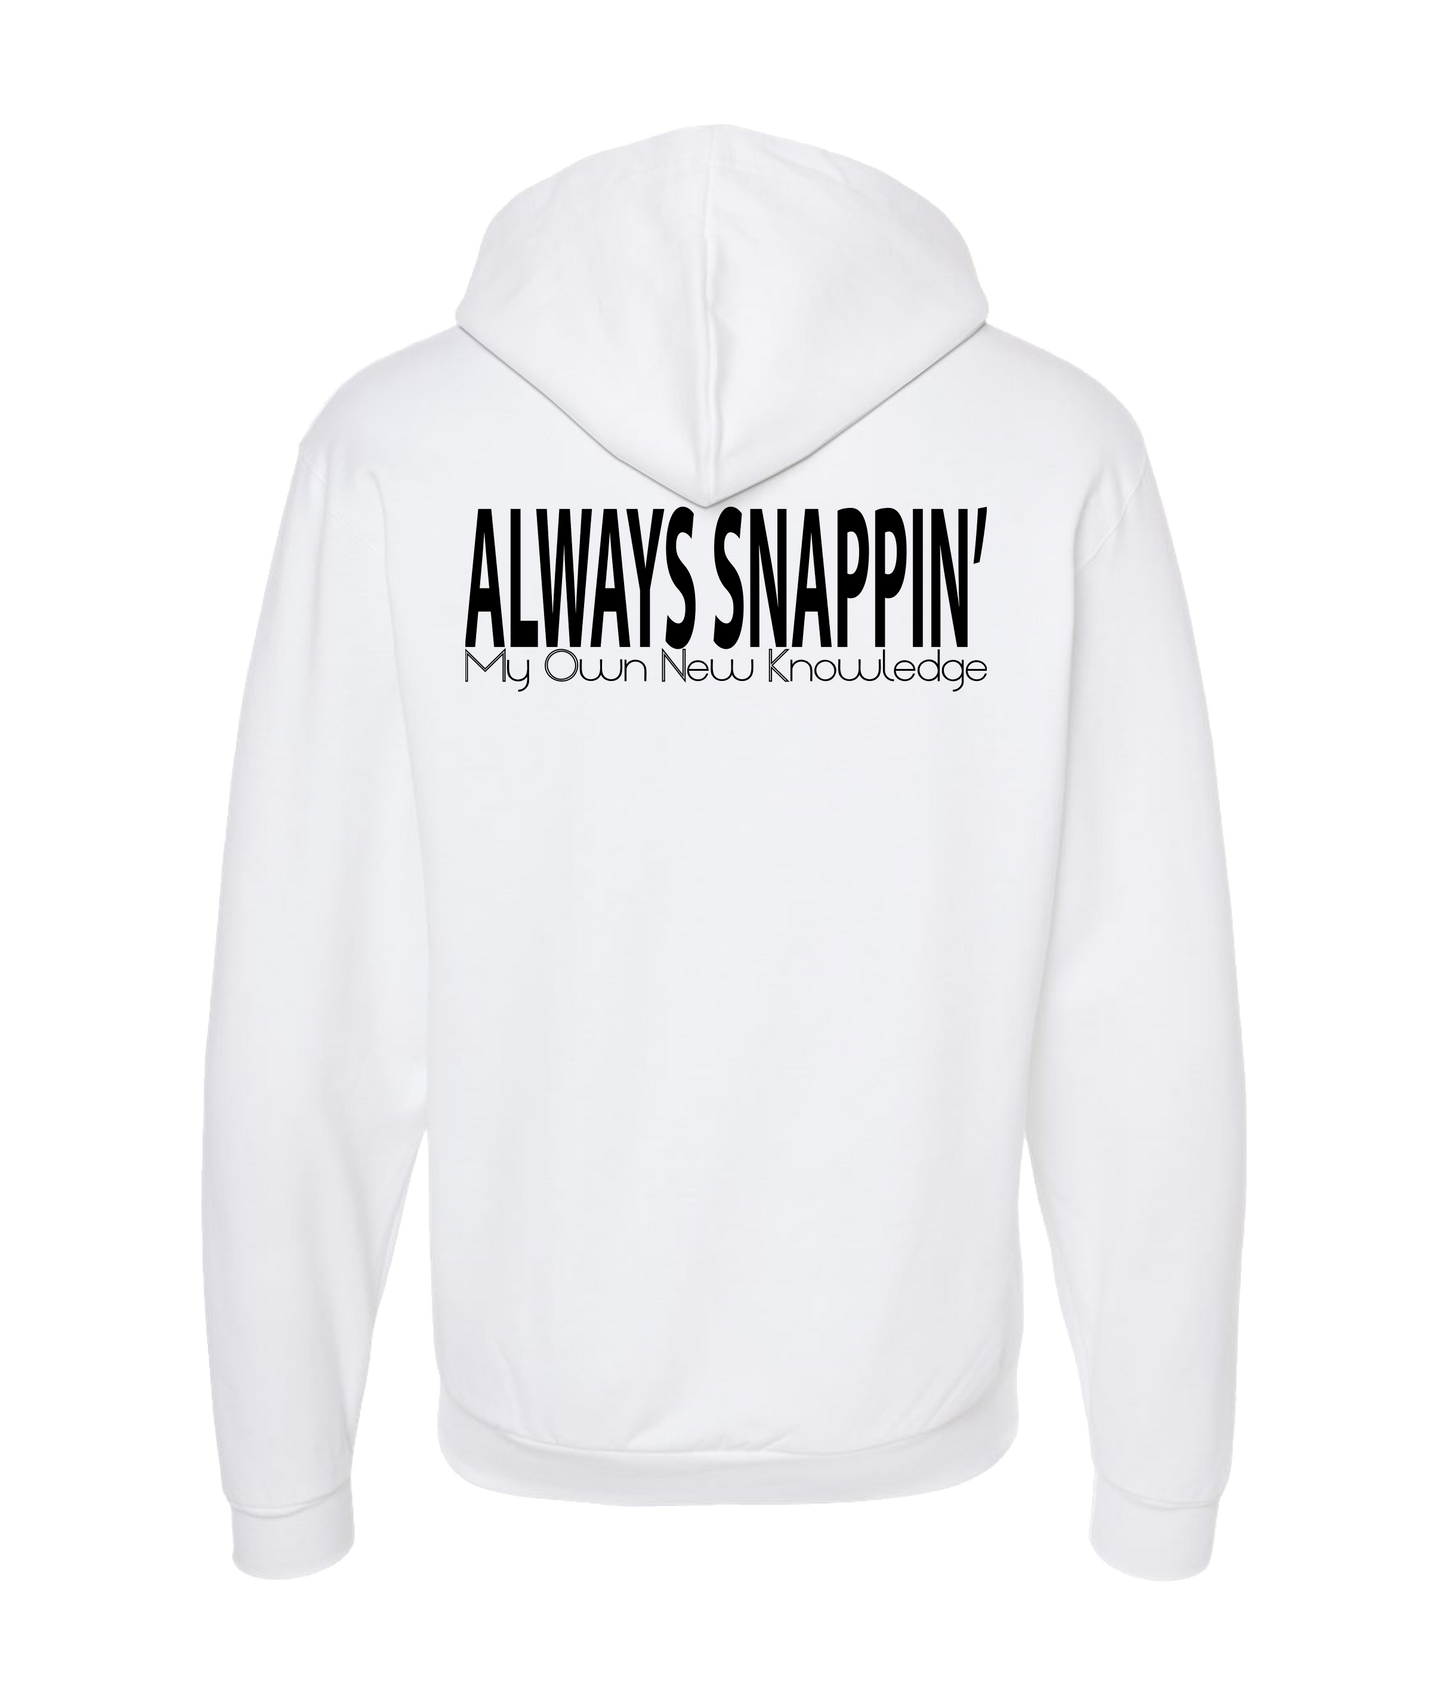 Monk Melville - Always Snappin' - White Zip Up Hoodie